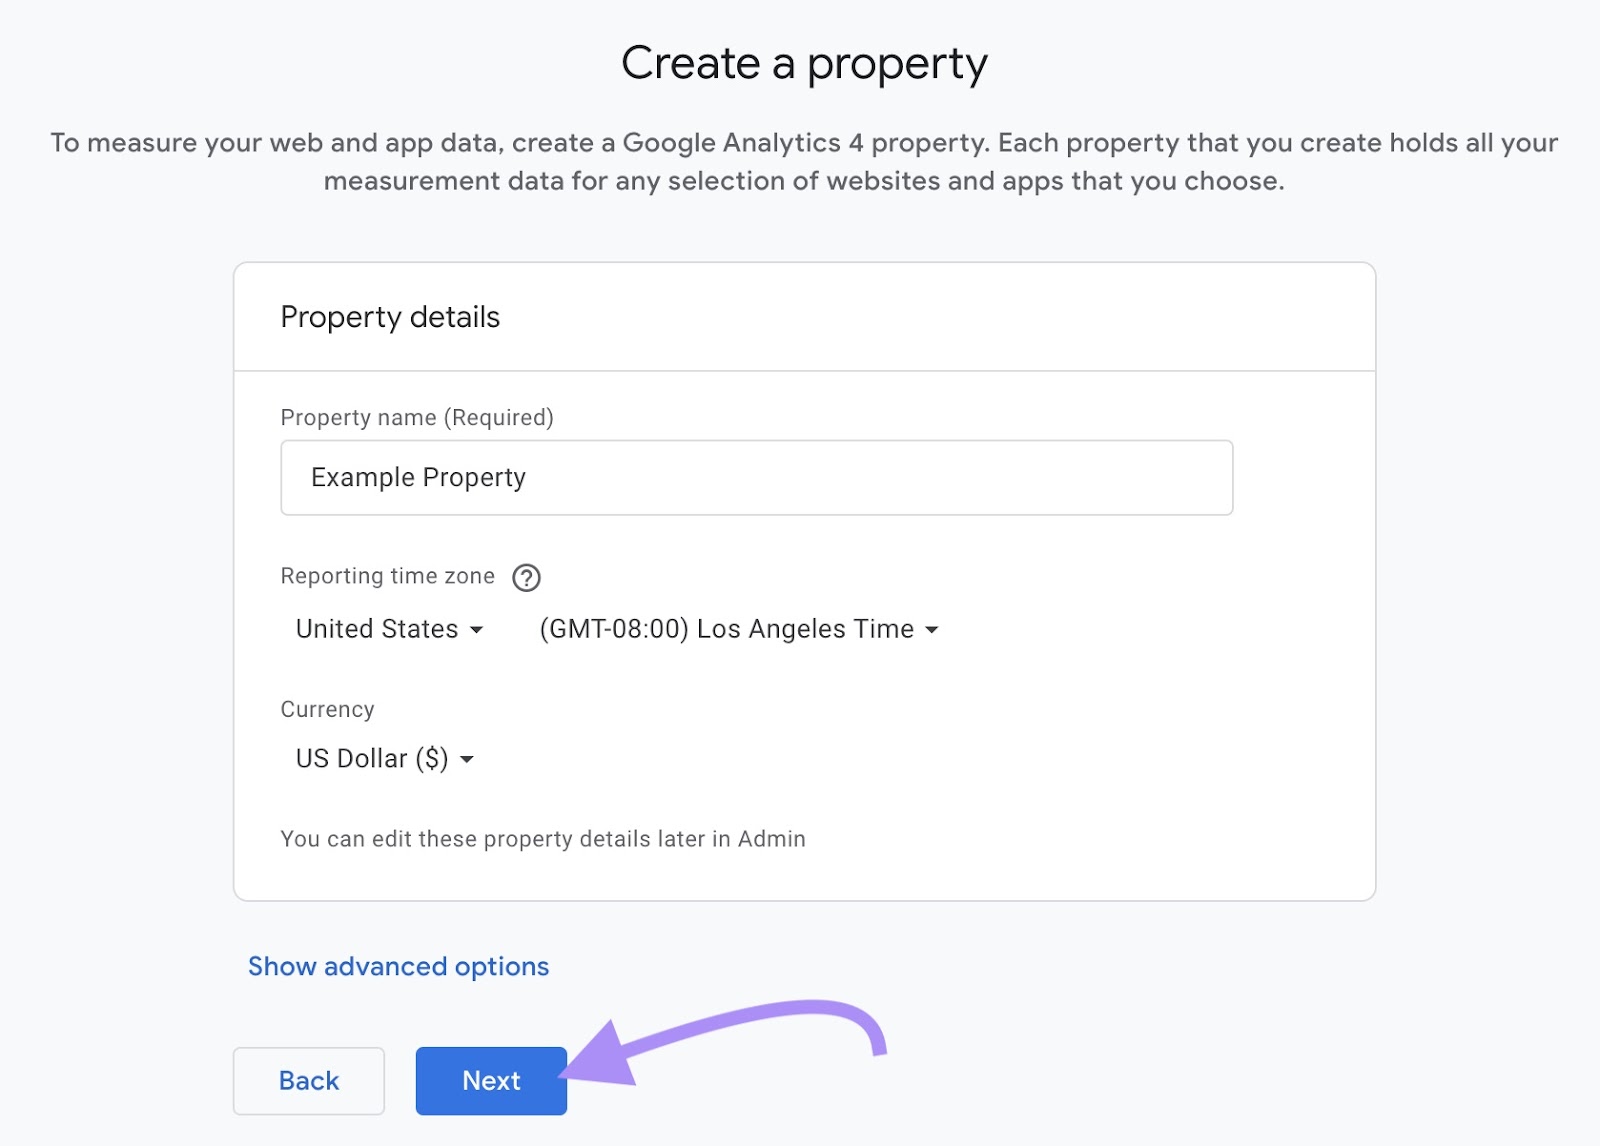 "Next" button highlighted at the bottom of "Create a property" step